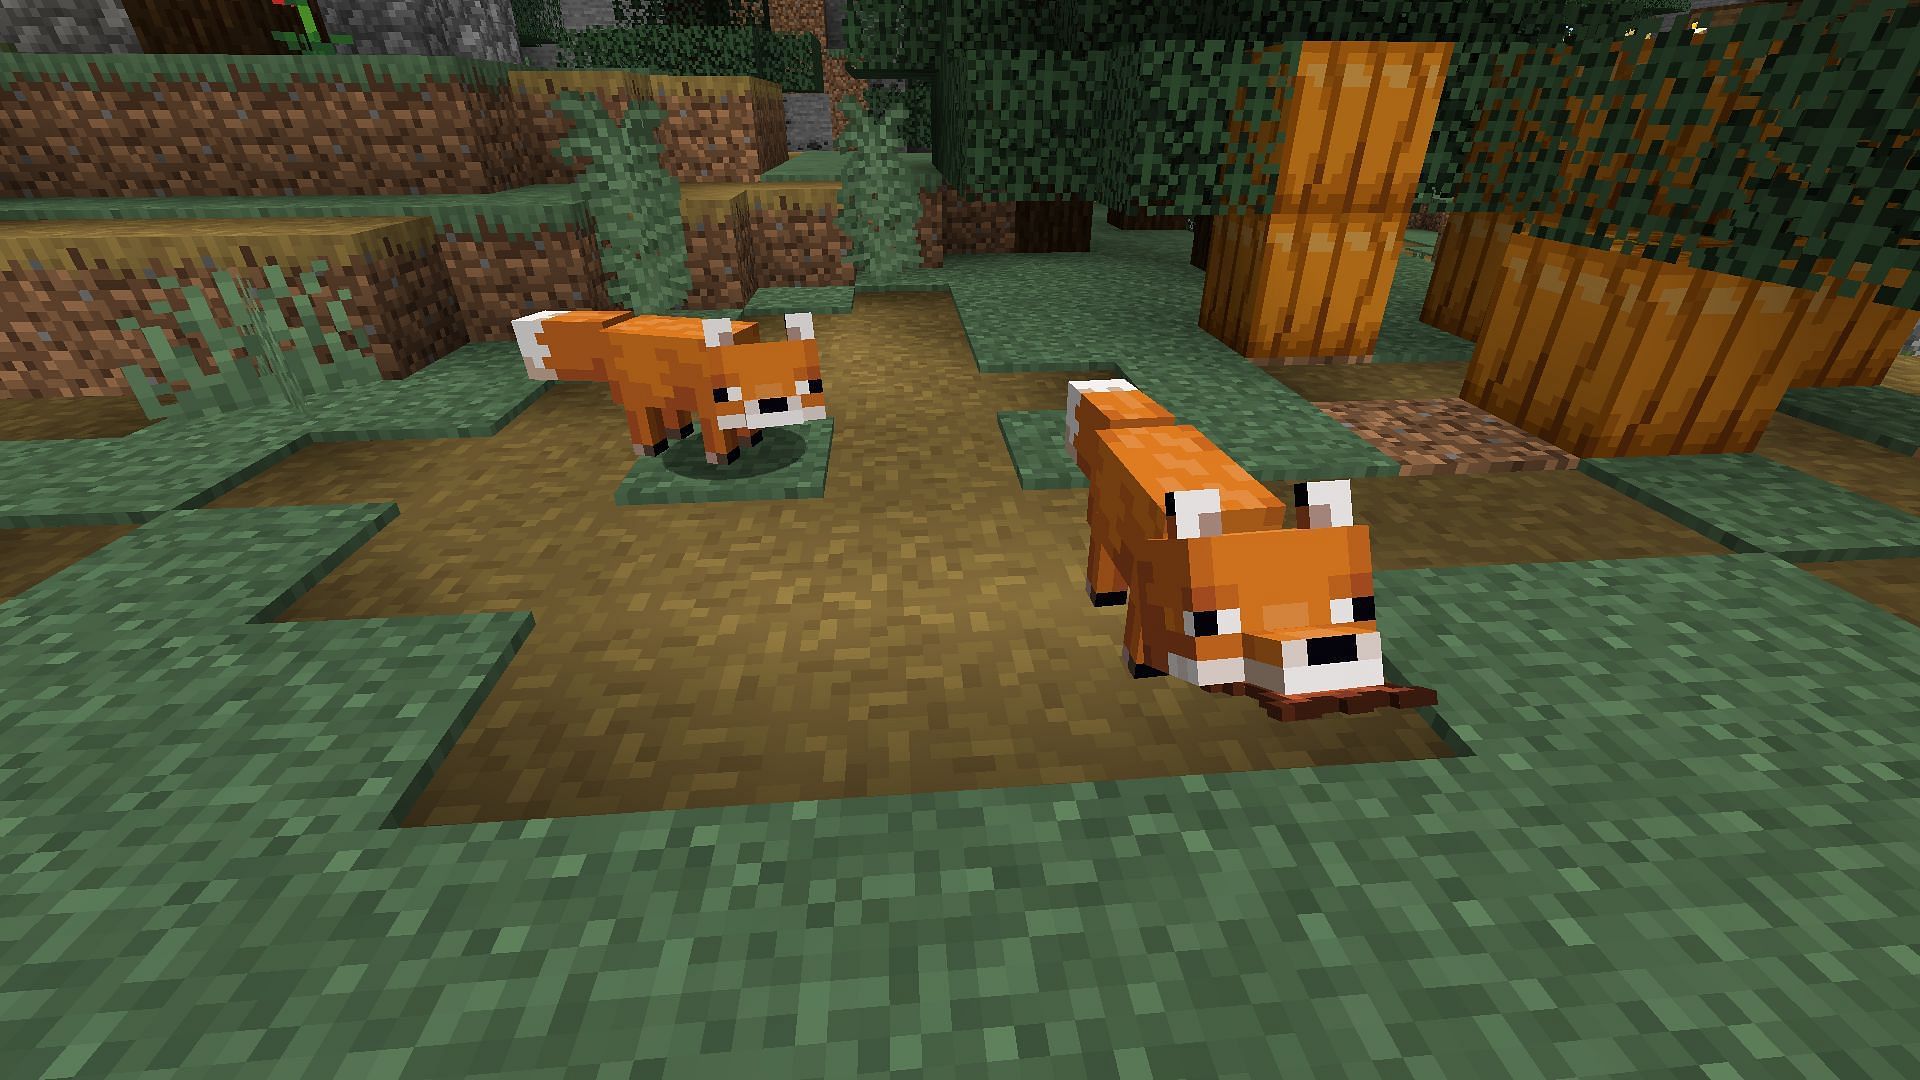 A couple of foxes in a taiga biome (Image via Minecraft)